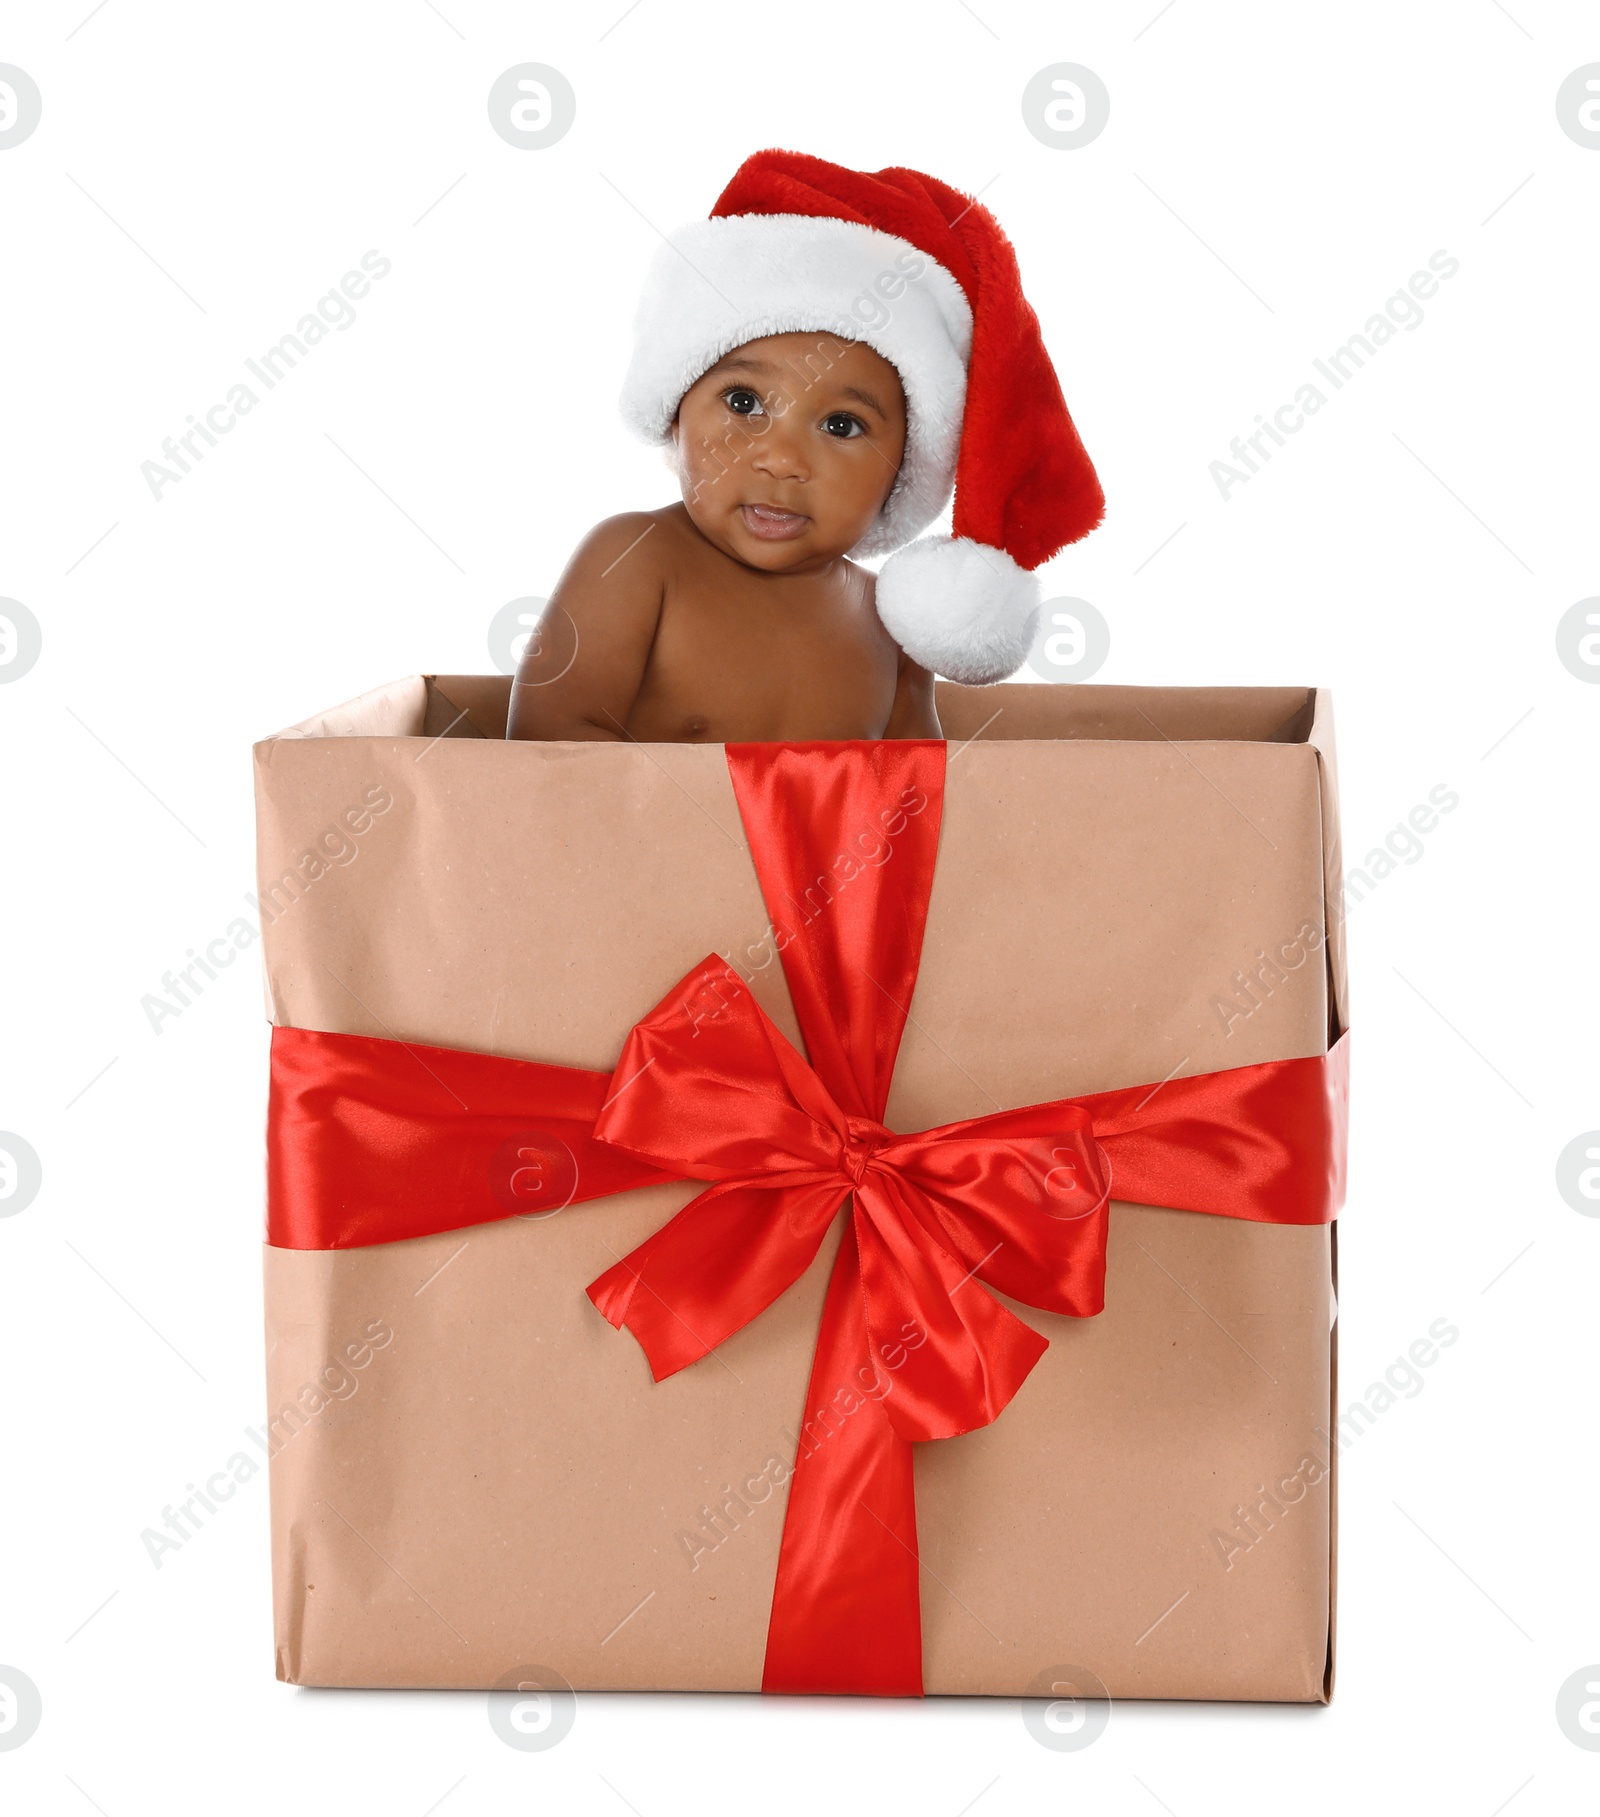 Photo of Cute African-American baby wearing Santa hat in Christmas gift box on white background